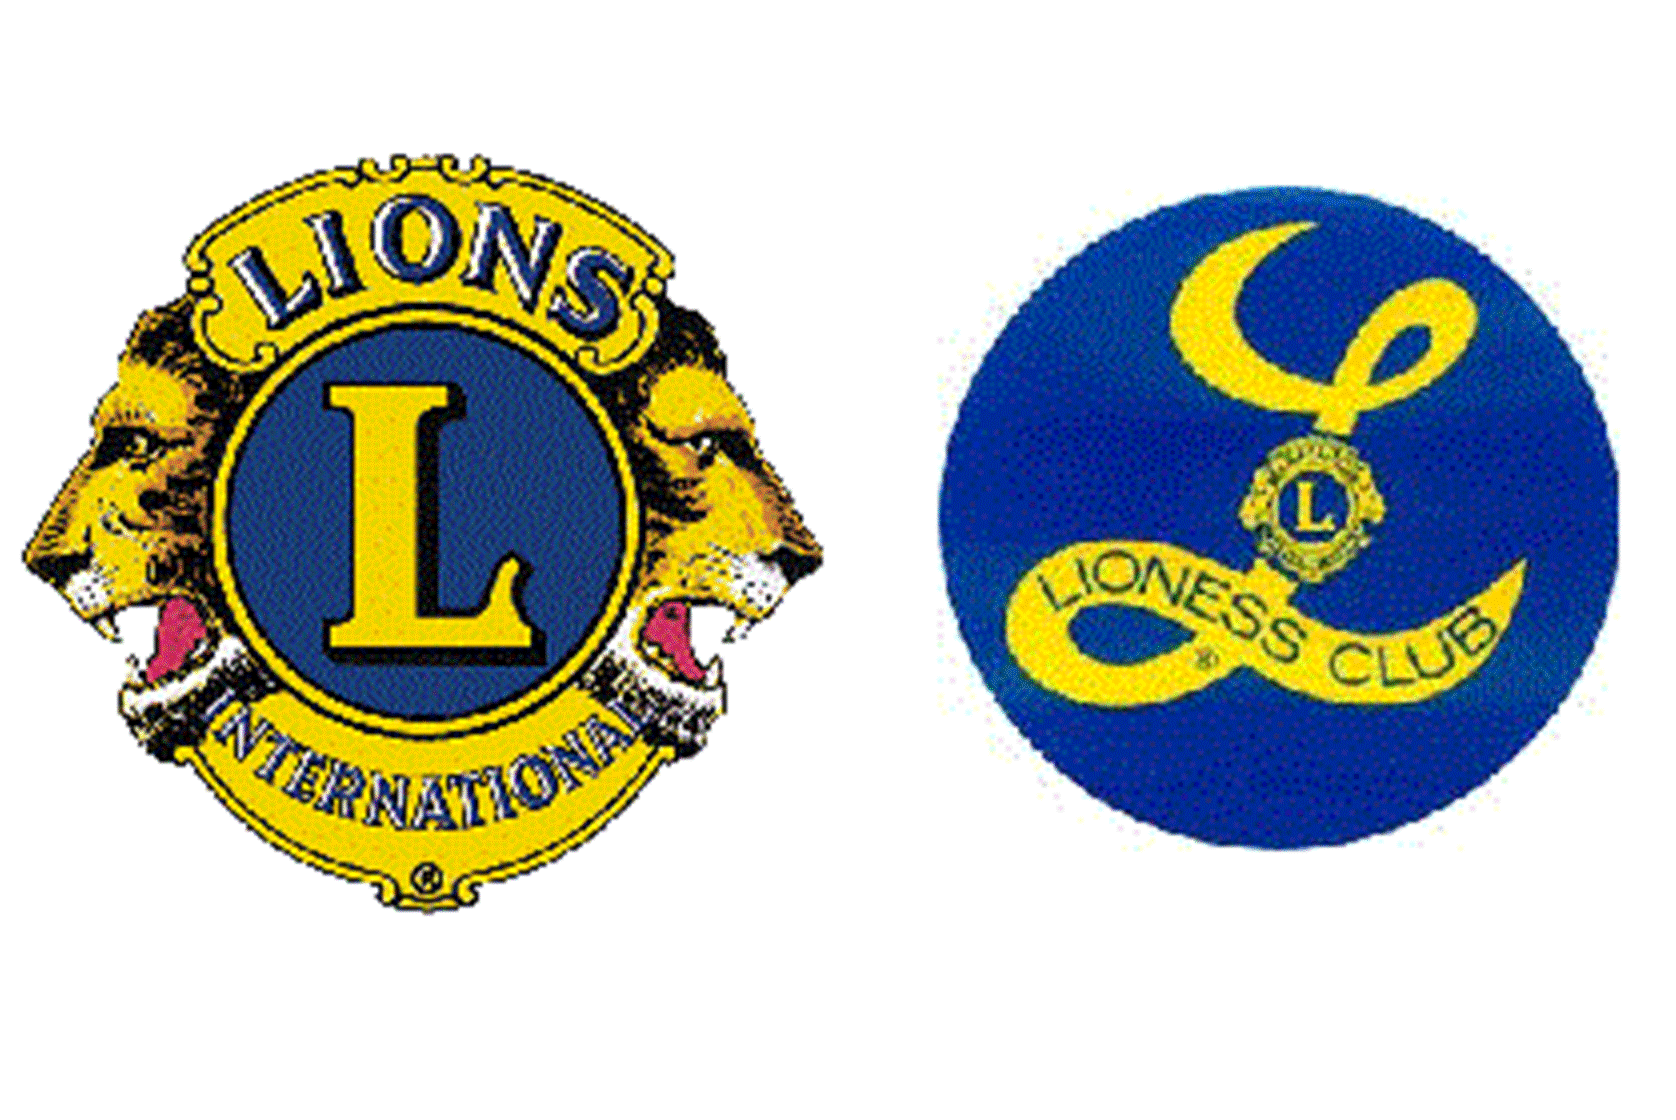 WEST PENN LIONS / LIONESS CLUB HOLDING MEMBERSHIP SOCIAL WEDNESDAY ...